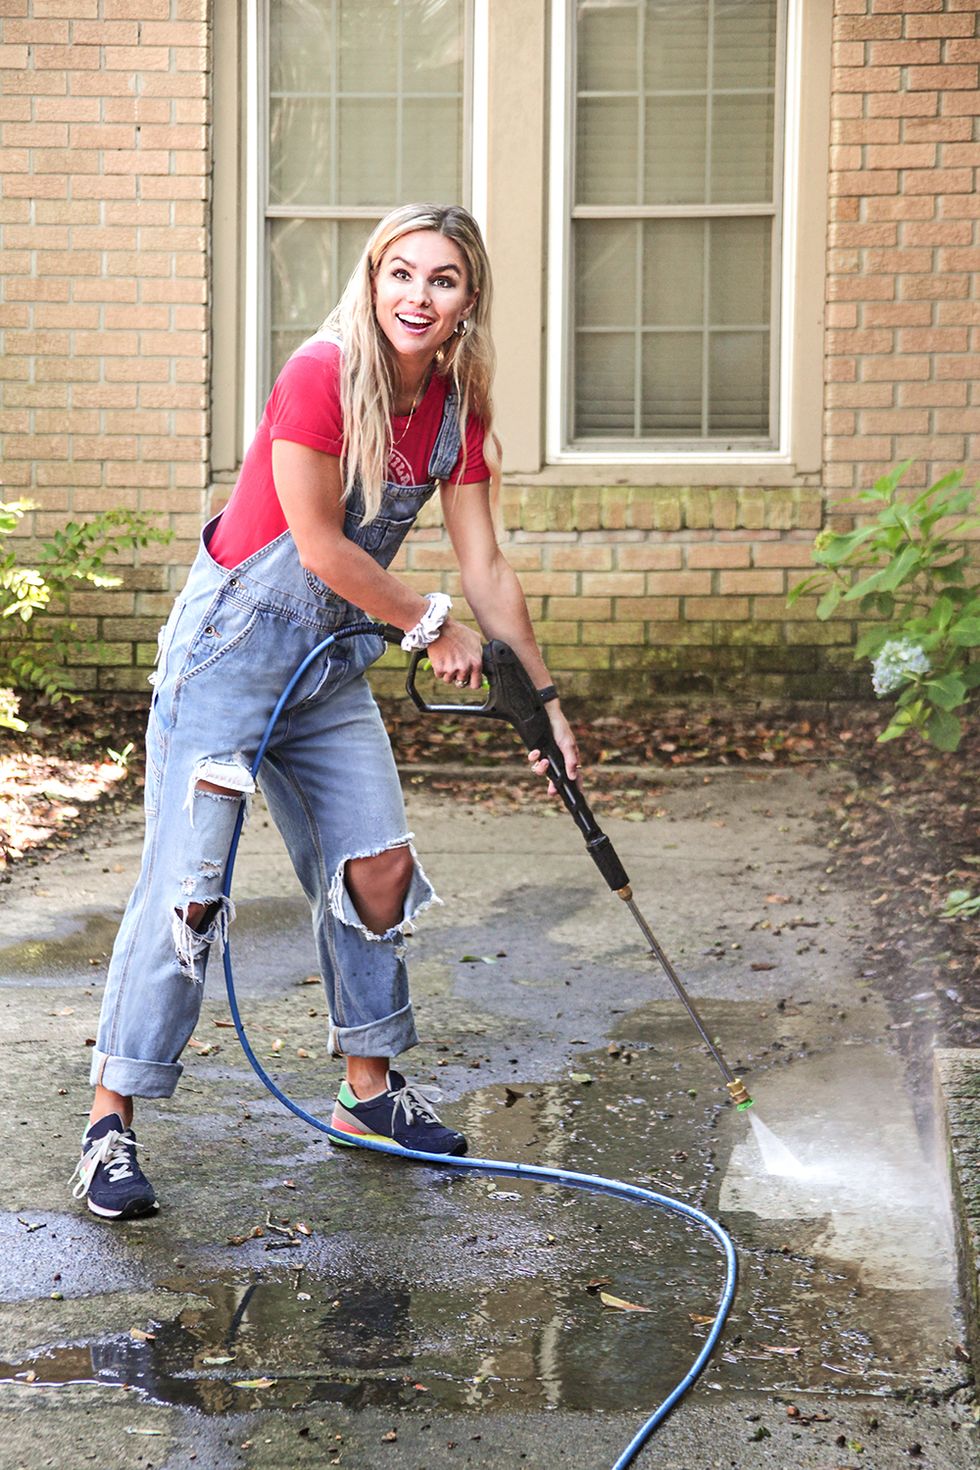 show host mary welch power washes homeowners nico and erika sprotti's exterior walls, which she plans to paint a brighter and more refreshing color, as seen on breaking bland, season 1